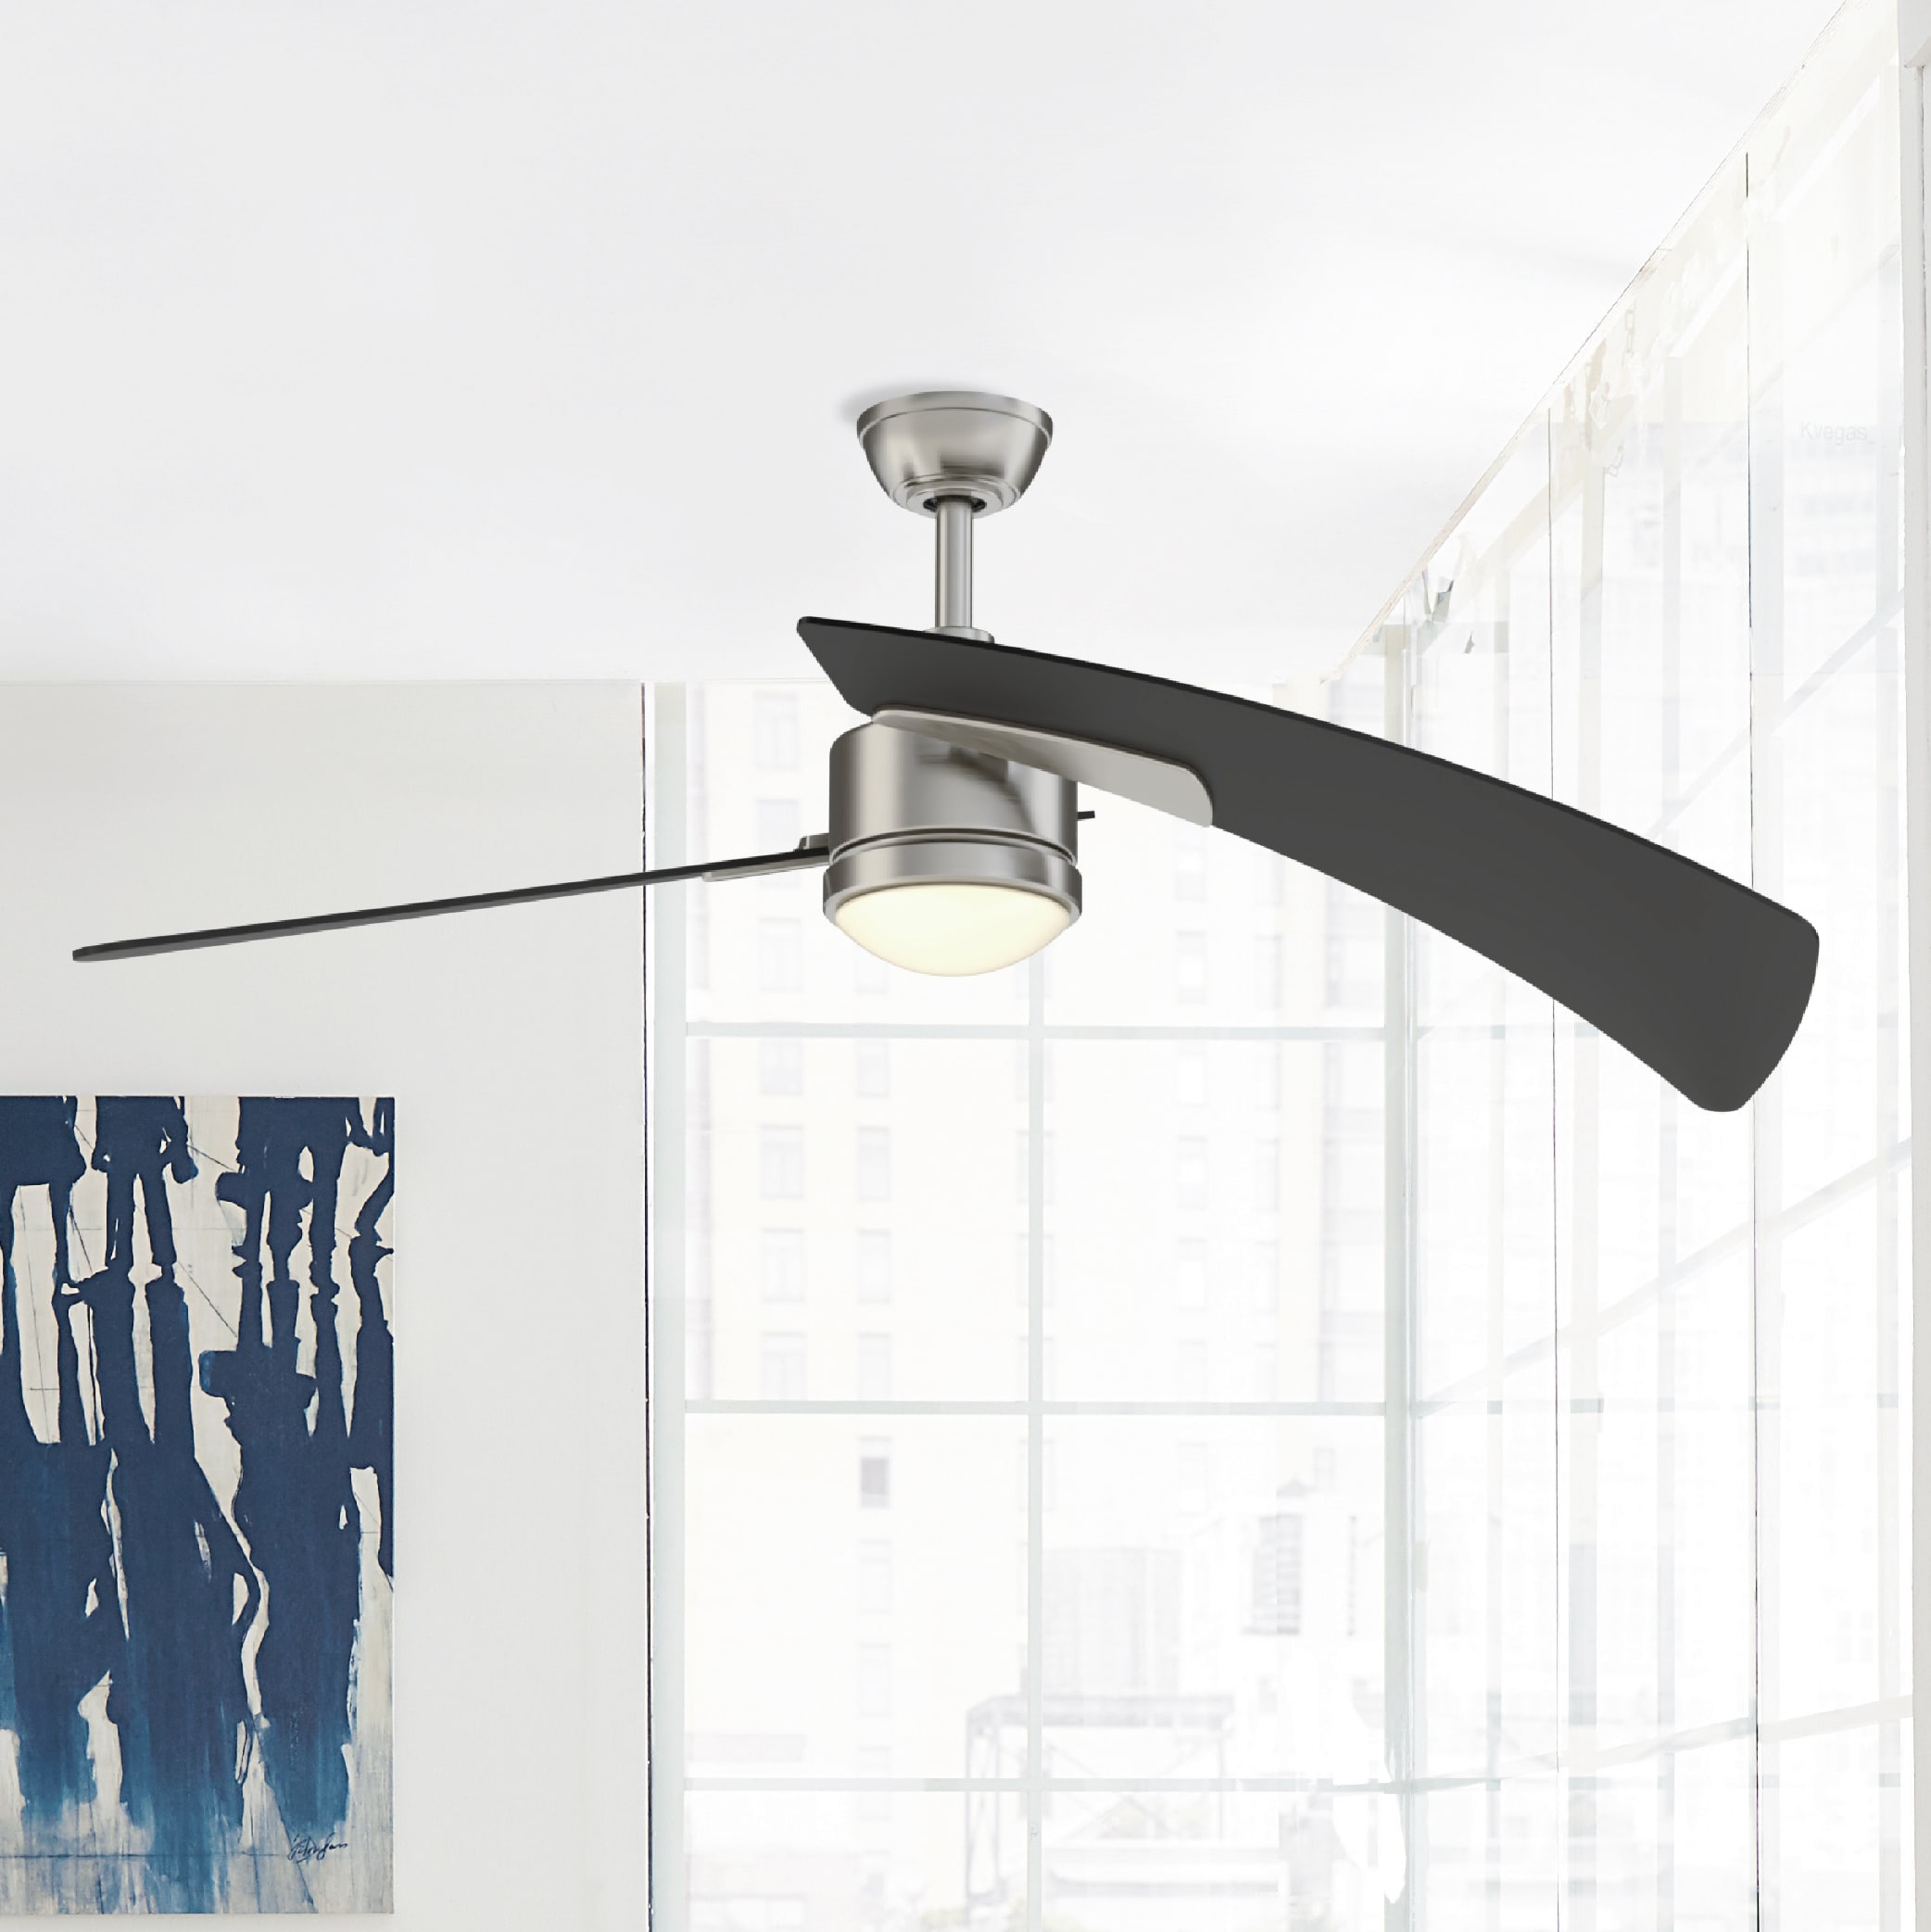 Integrated Led Indoor Ceiling Fan